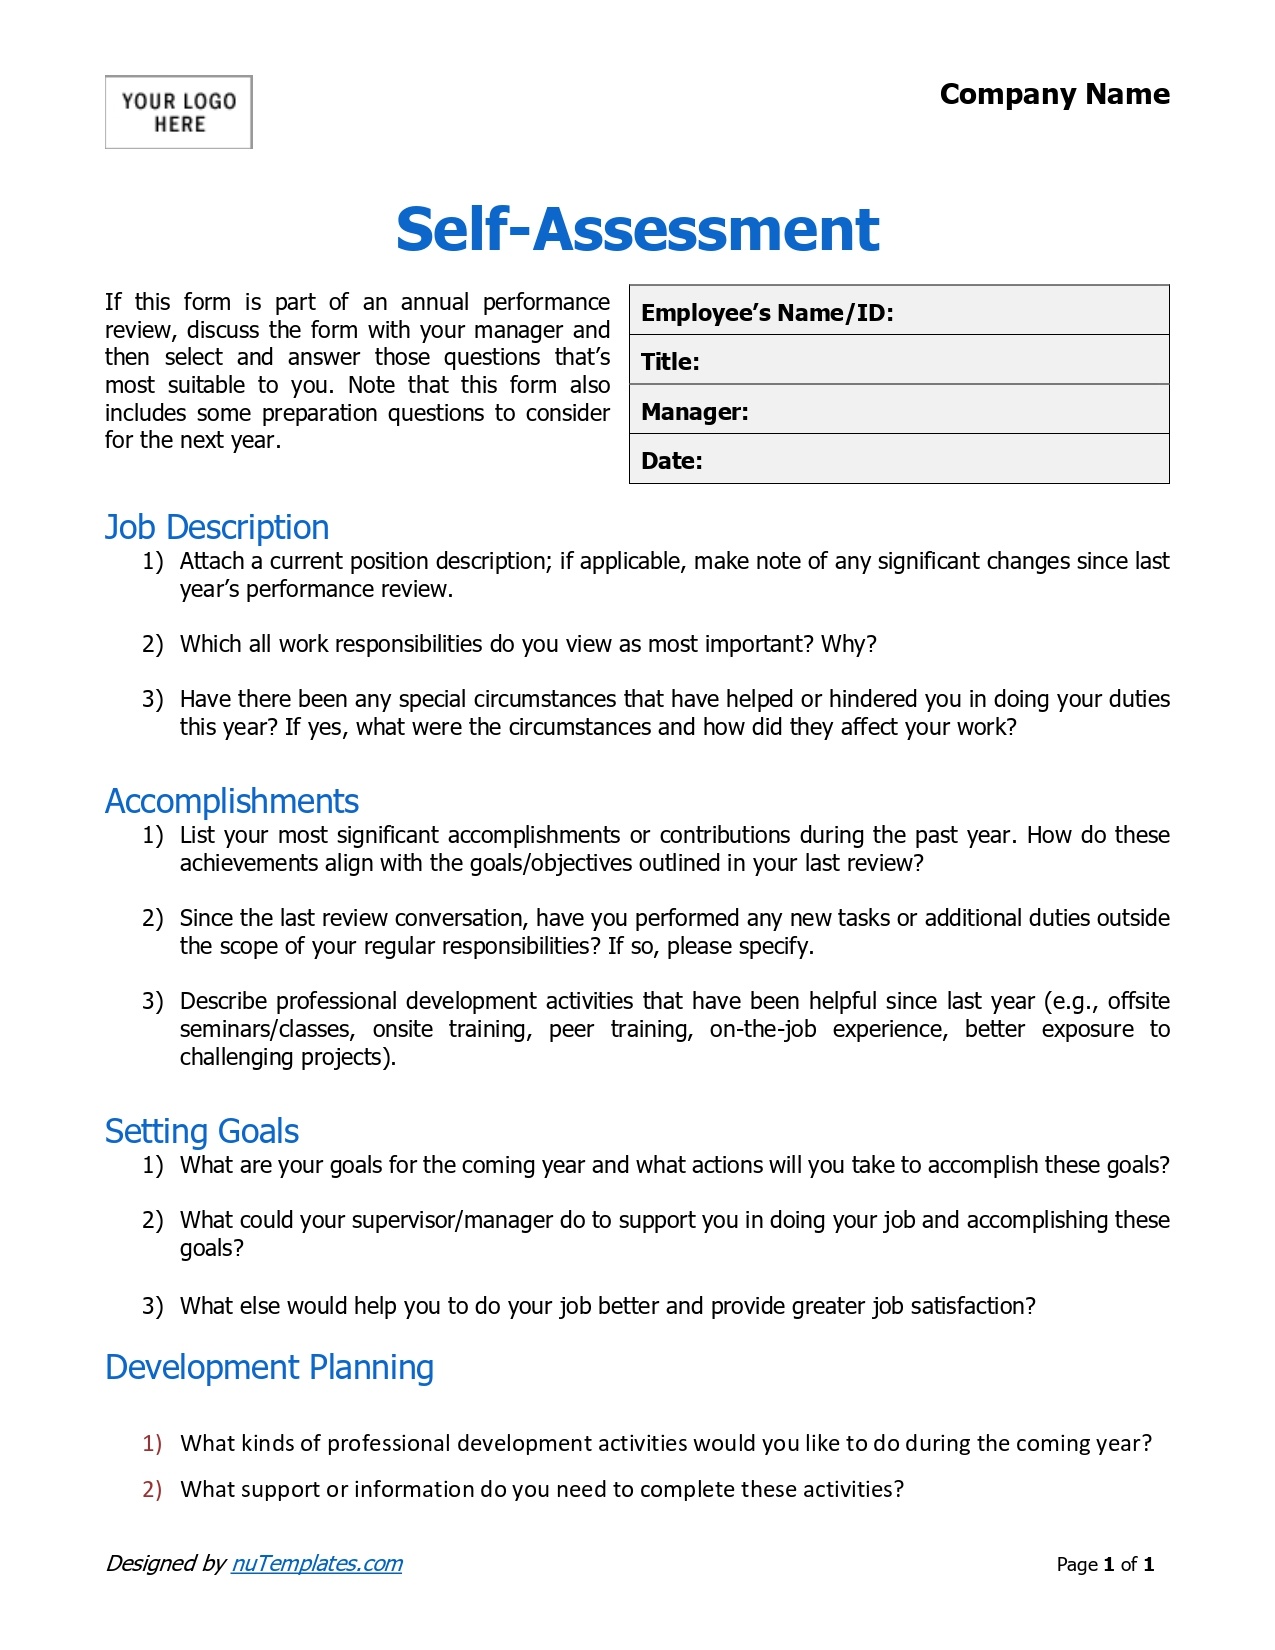 employee-self-evaluation-form-self-assessment-form-nutemplates